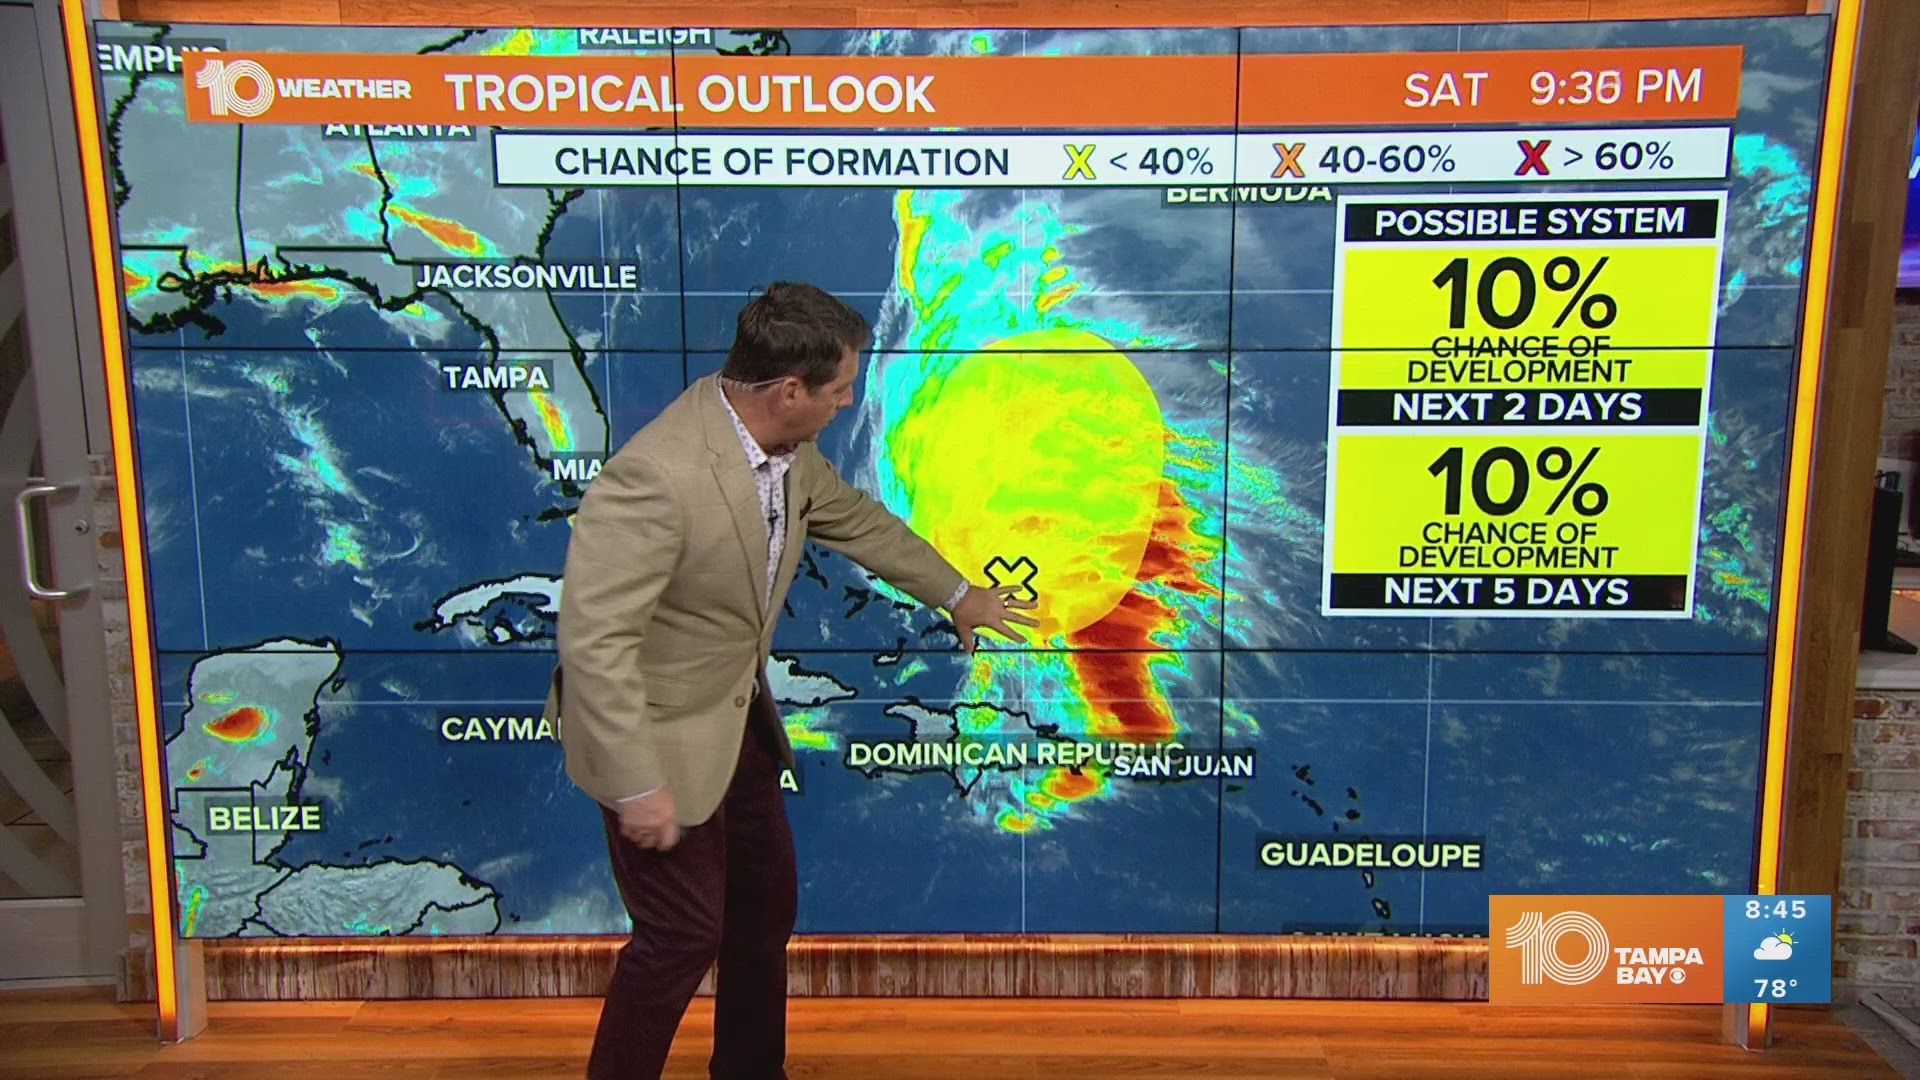 The National Hurricane Center predicts a small chance of development.